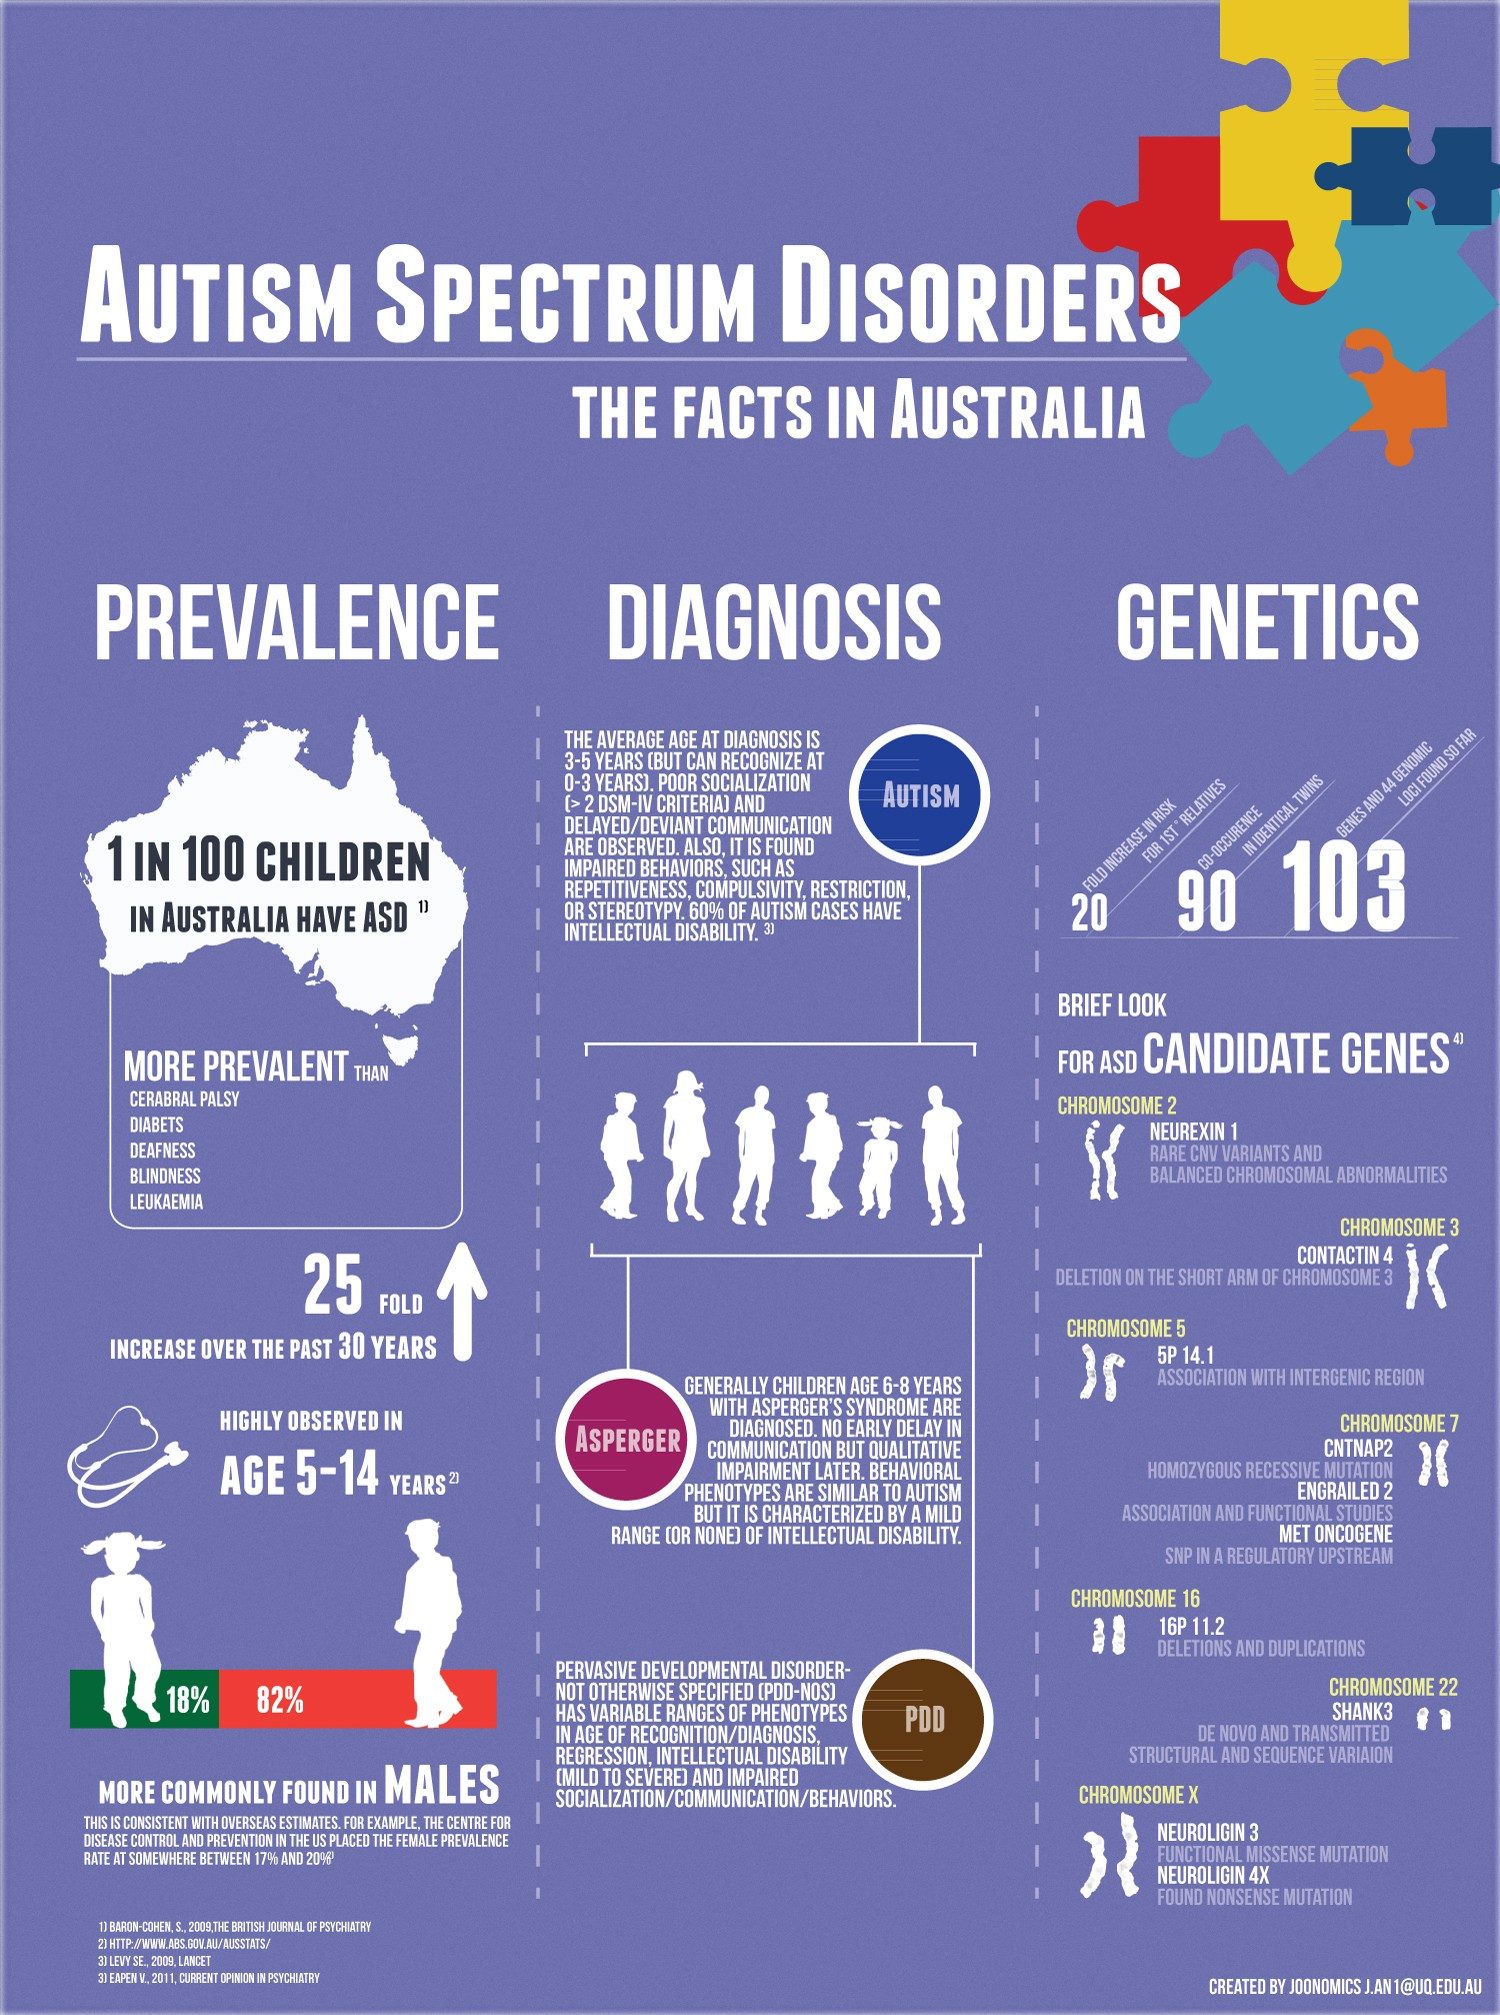 Do You Suspect Your Child Is On the Autism Spectrum?